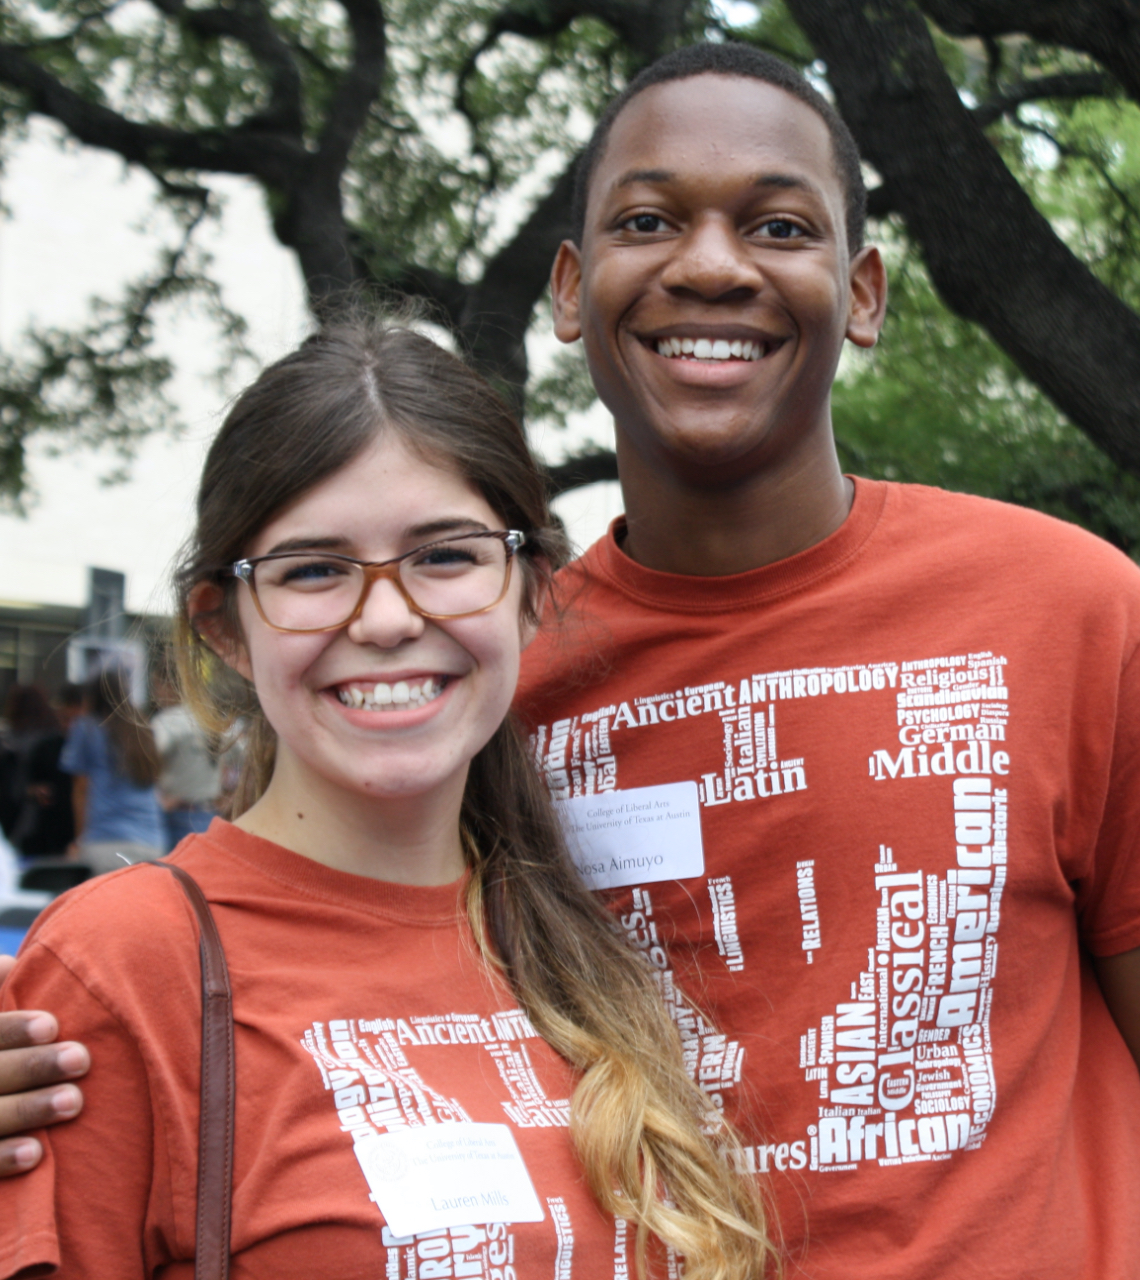 two students at an outdoor university event pose for the camera